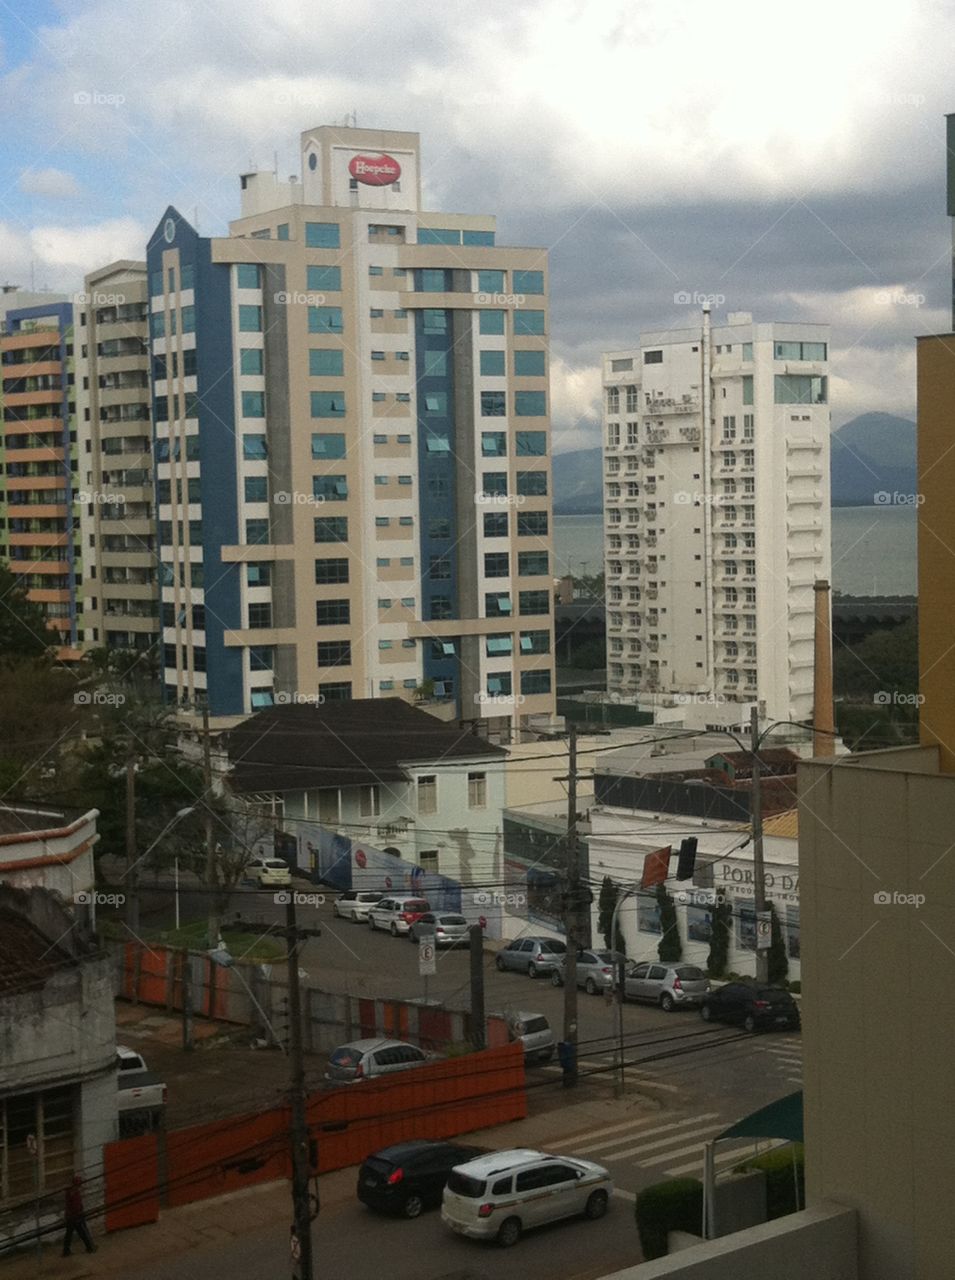 View from my Hotel. View from my hotel in Florianopolis, Brazil